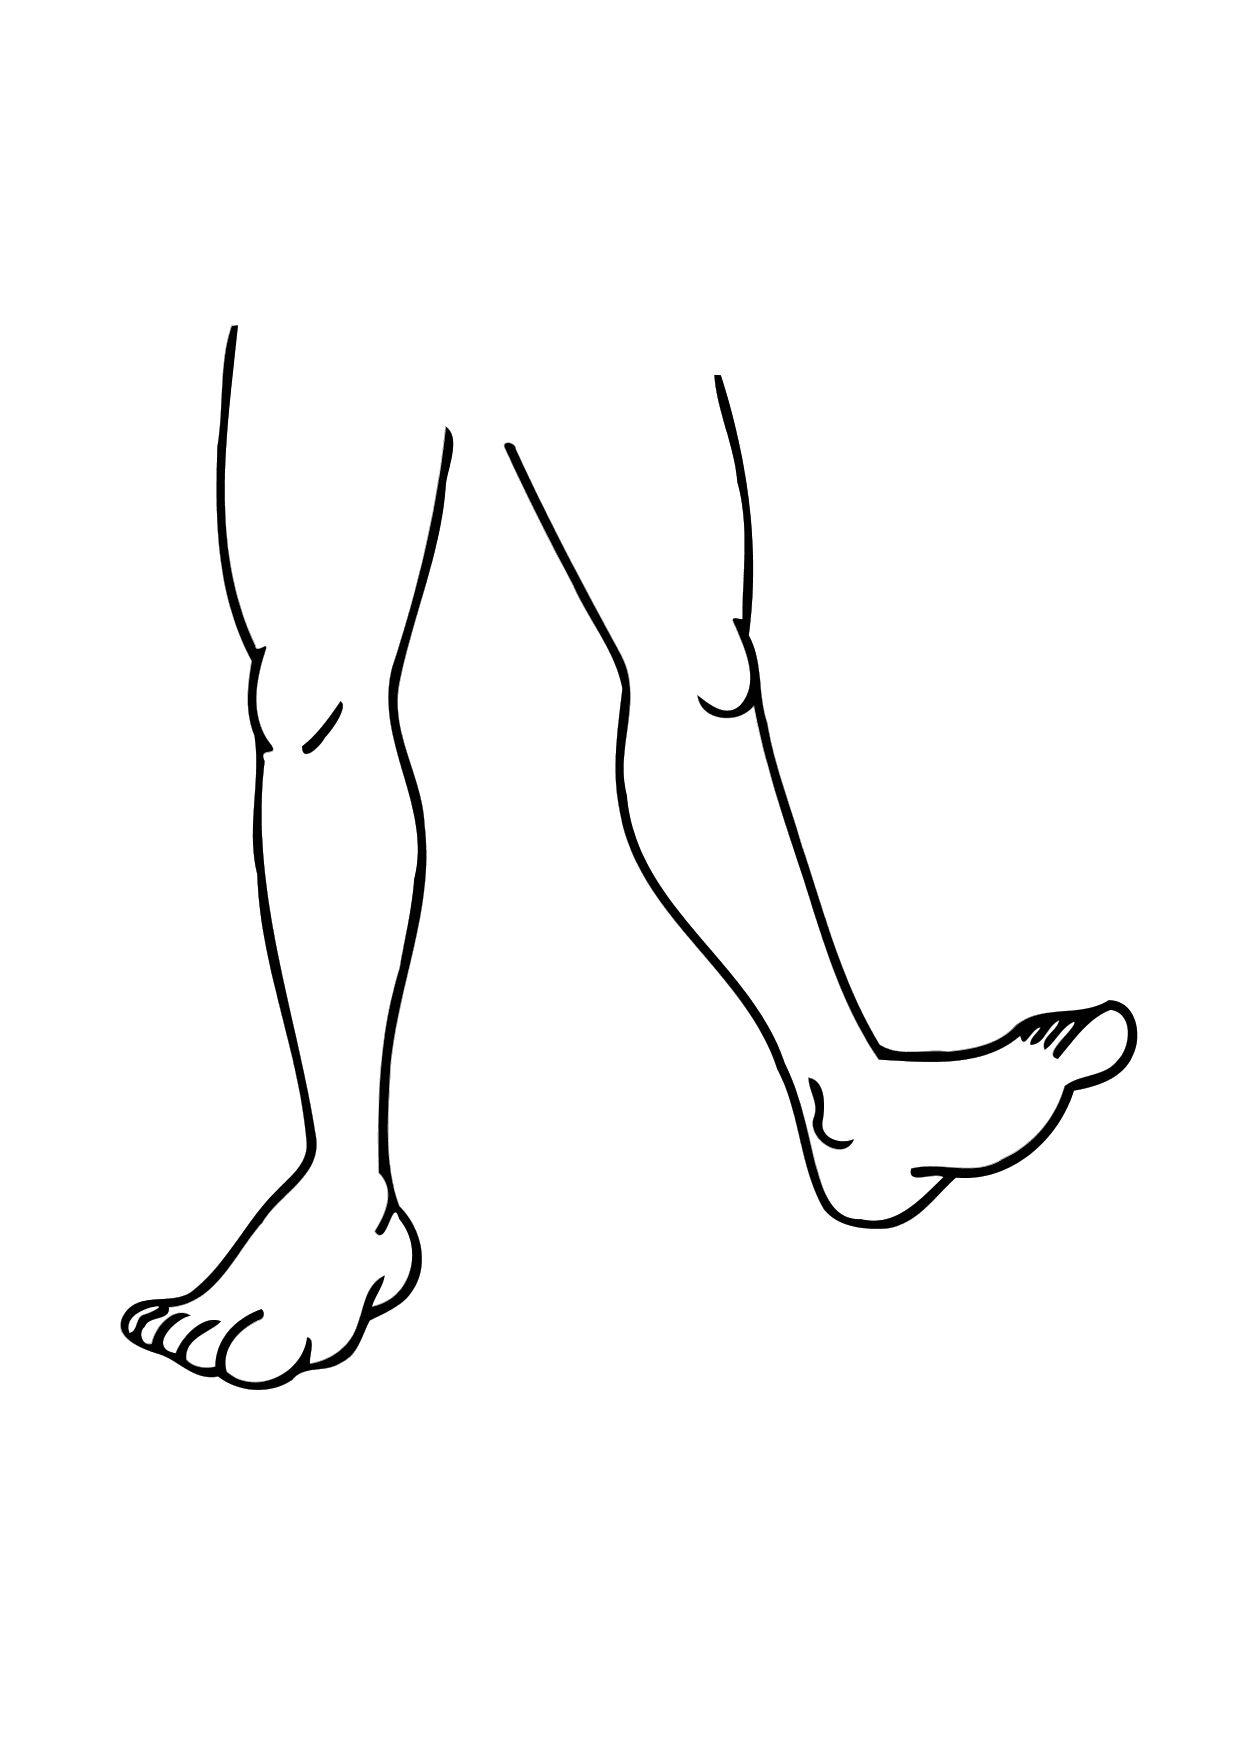 Coloring Page legs - free printable coloring pages - Img 11476